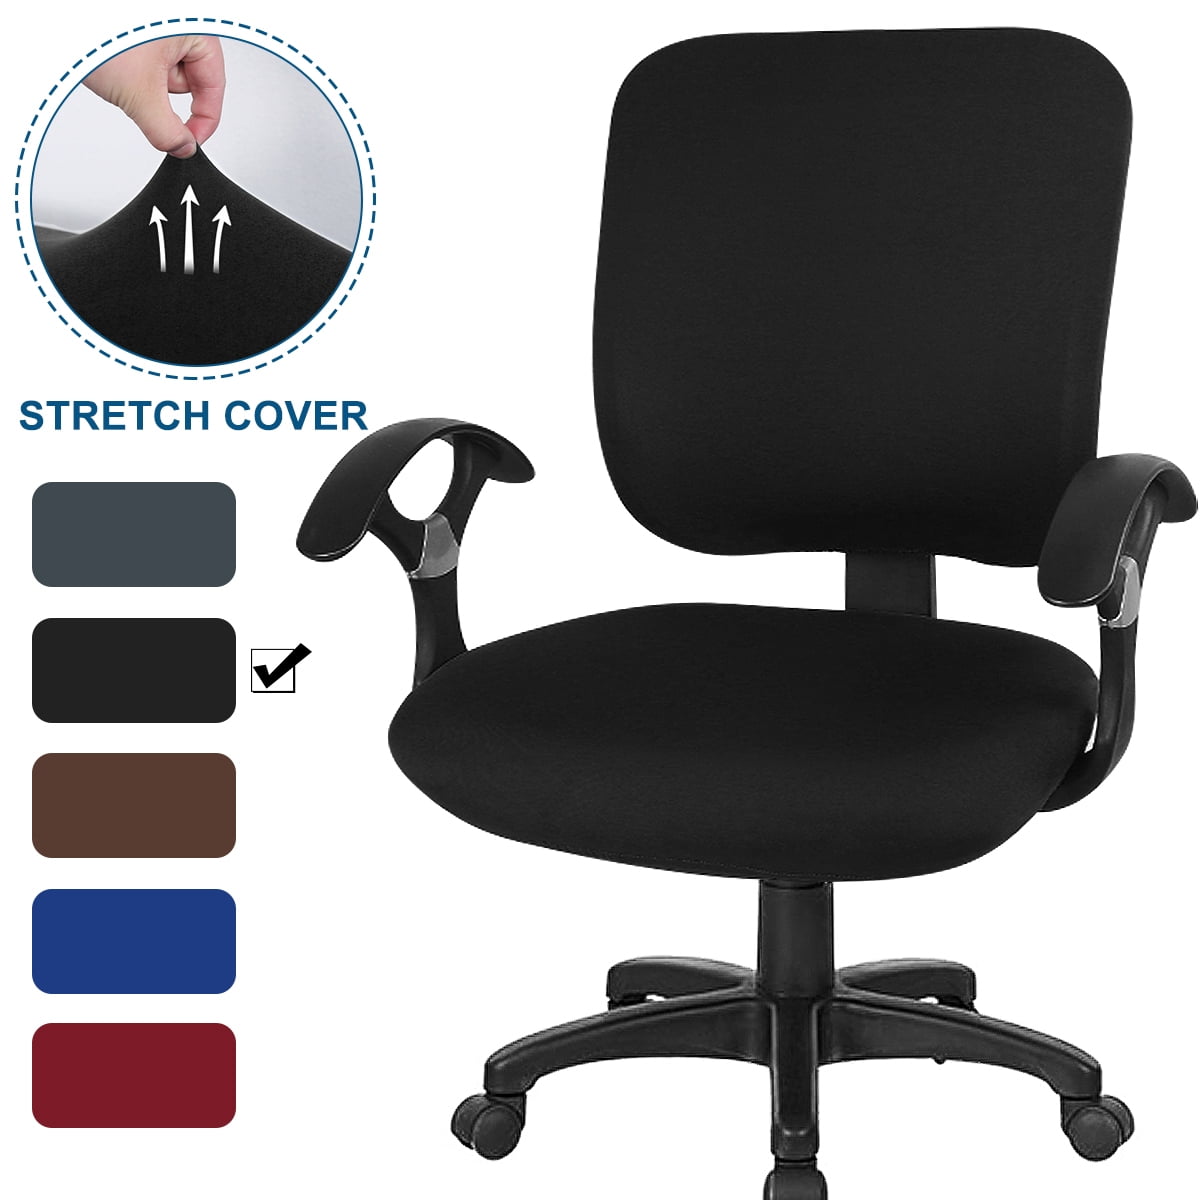 Beige Arm Rest Pads Stretch Protector for Home Office Yuhoo Office Chair Armrest Cover 1pair Removable Elastic Washable Waterproof Fabric Office Chair Armrest Slipcovers Covers Pads 